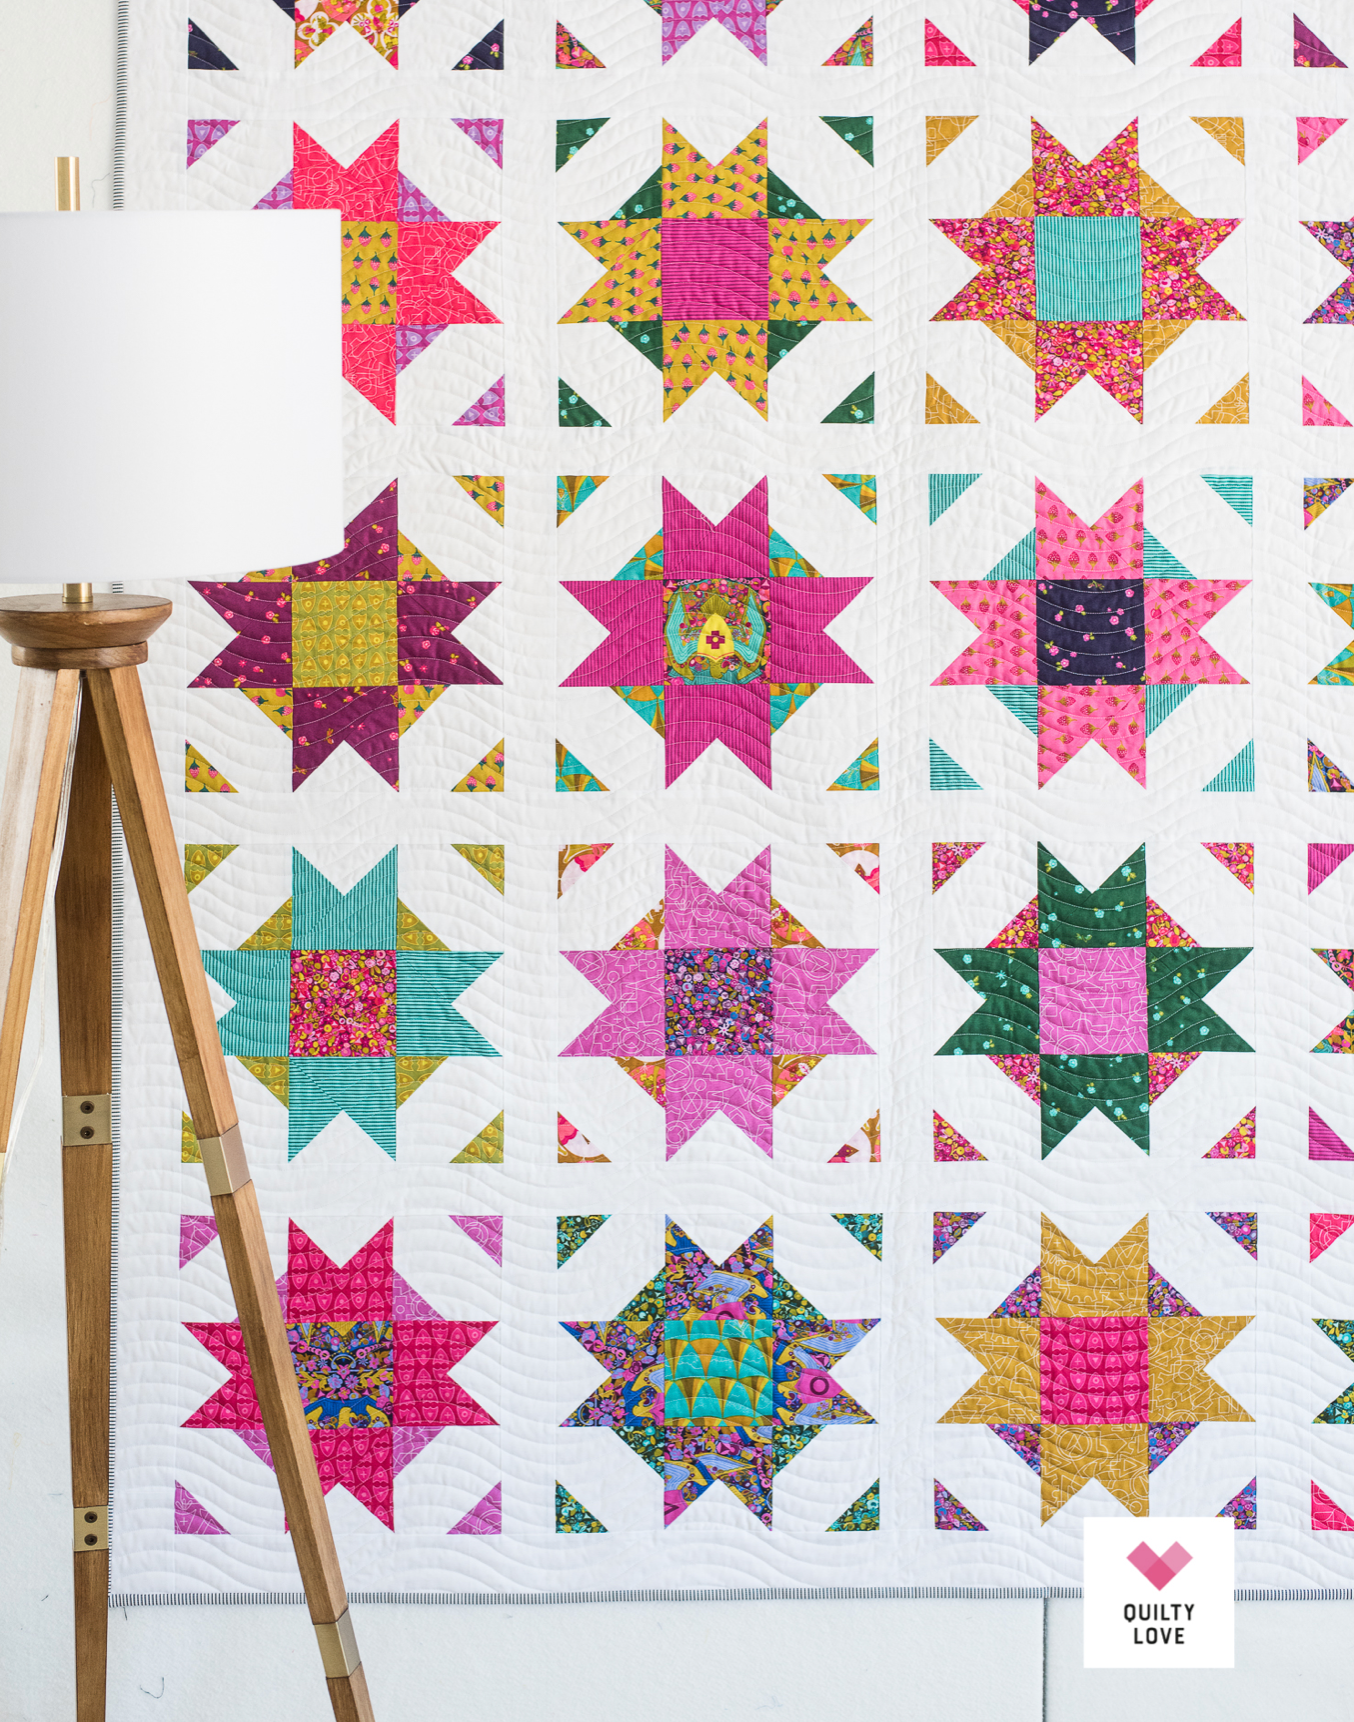 COMPASS STAR Quilty Love Pattern by Emily Dennis #124